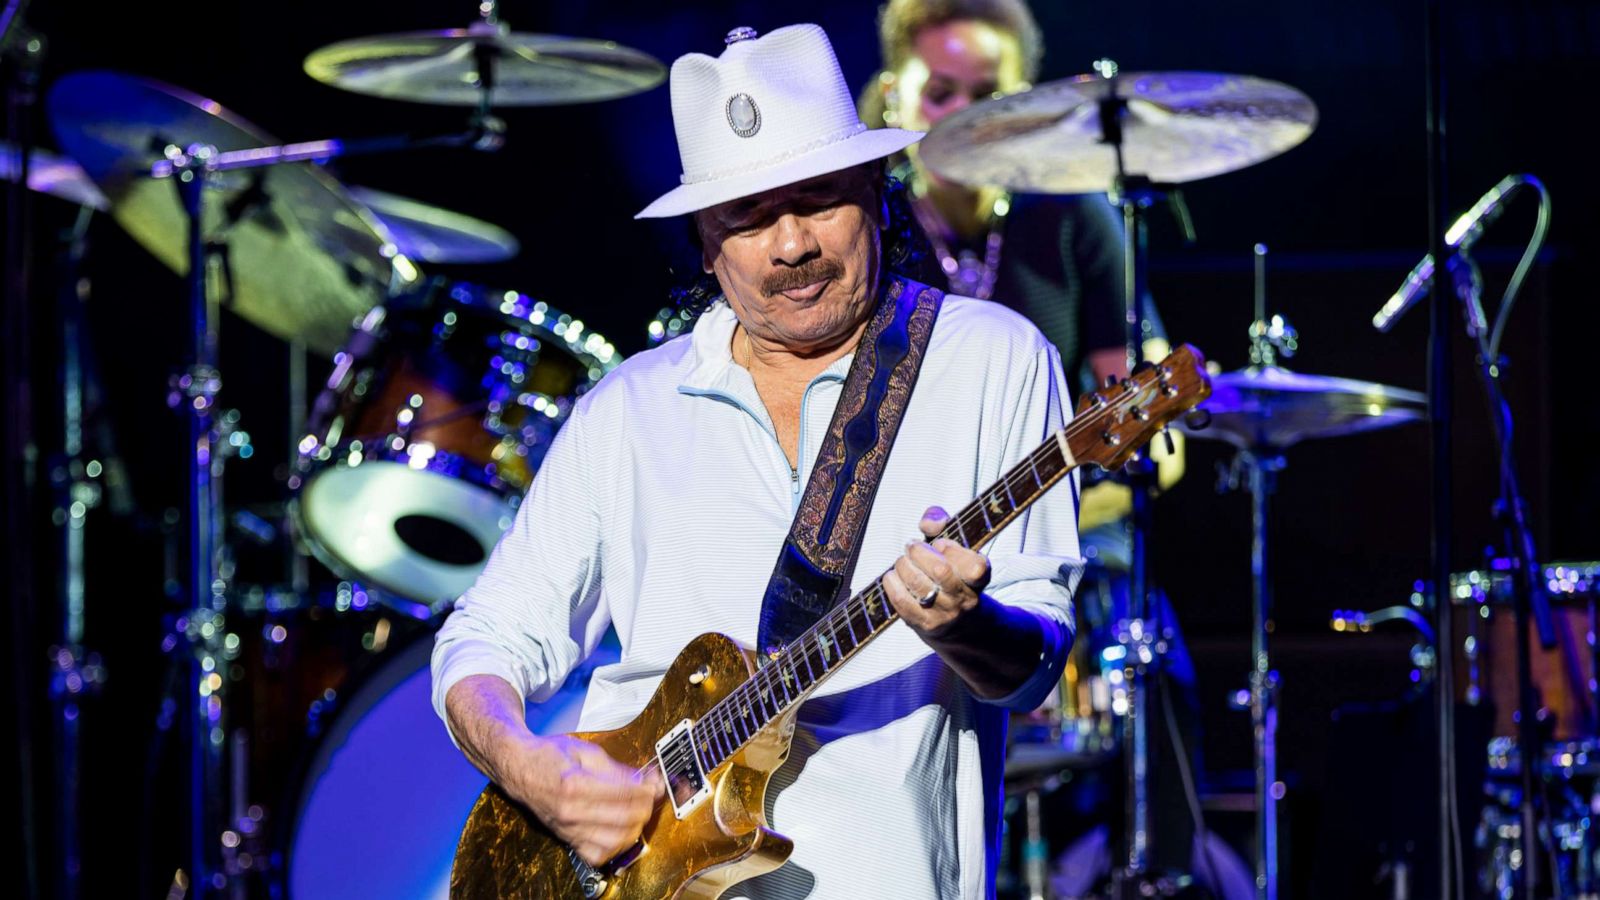 Carlos Santana collapsed on stage during a July 5 concert at the Pine Knob Music Theater, an outdoor amphitheater in Clarkston, about 40 miles northwest of Detroit, Michigan.